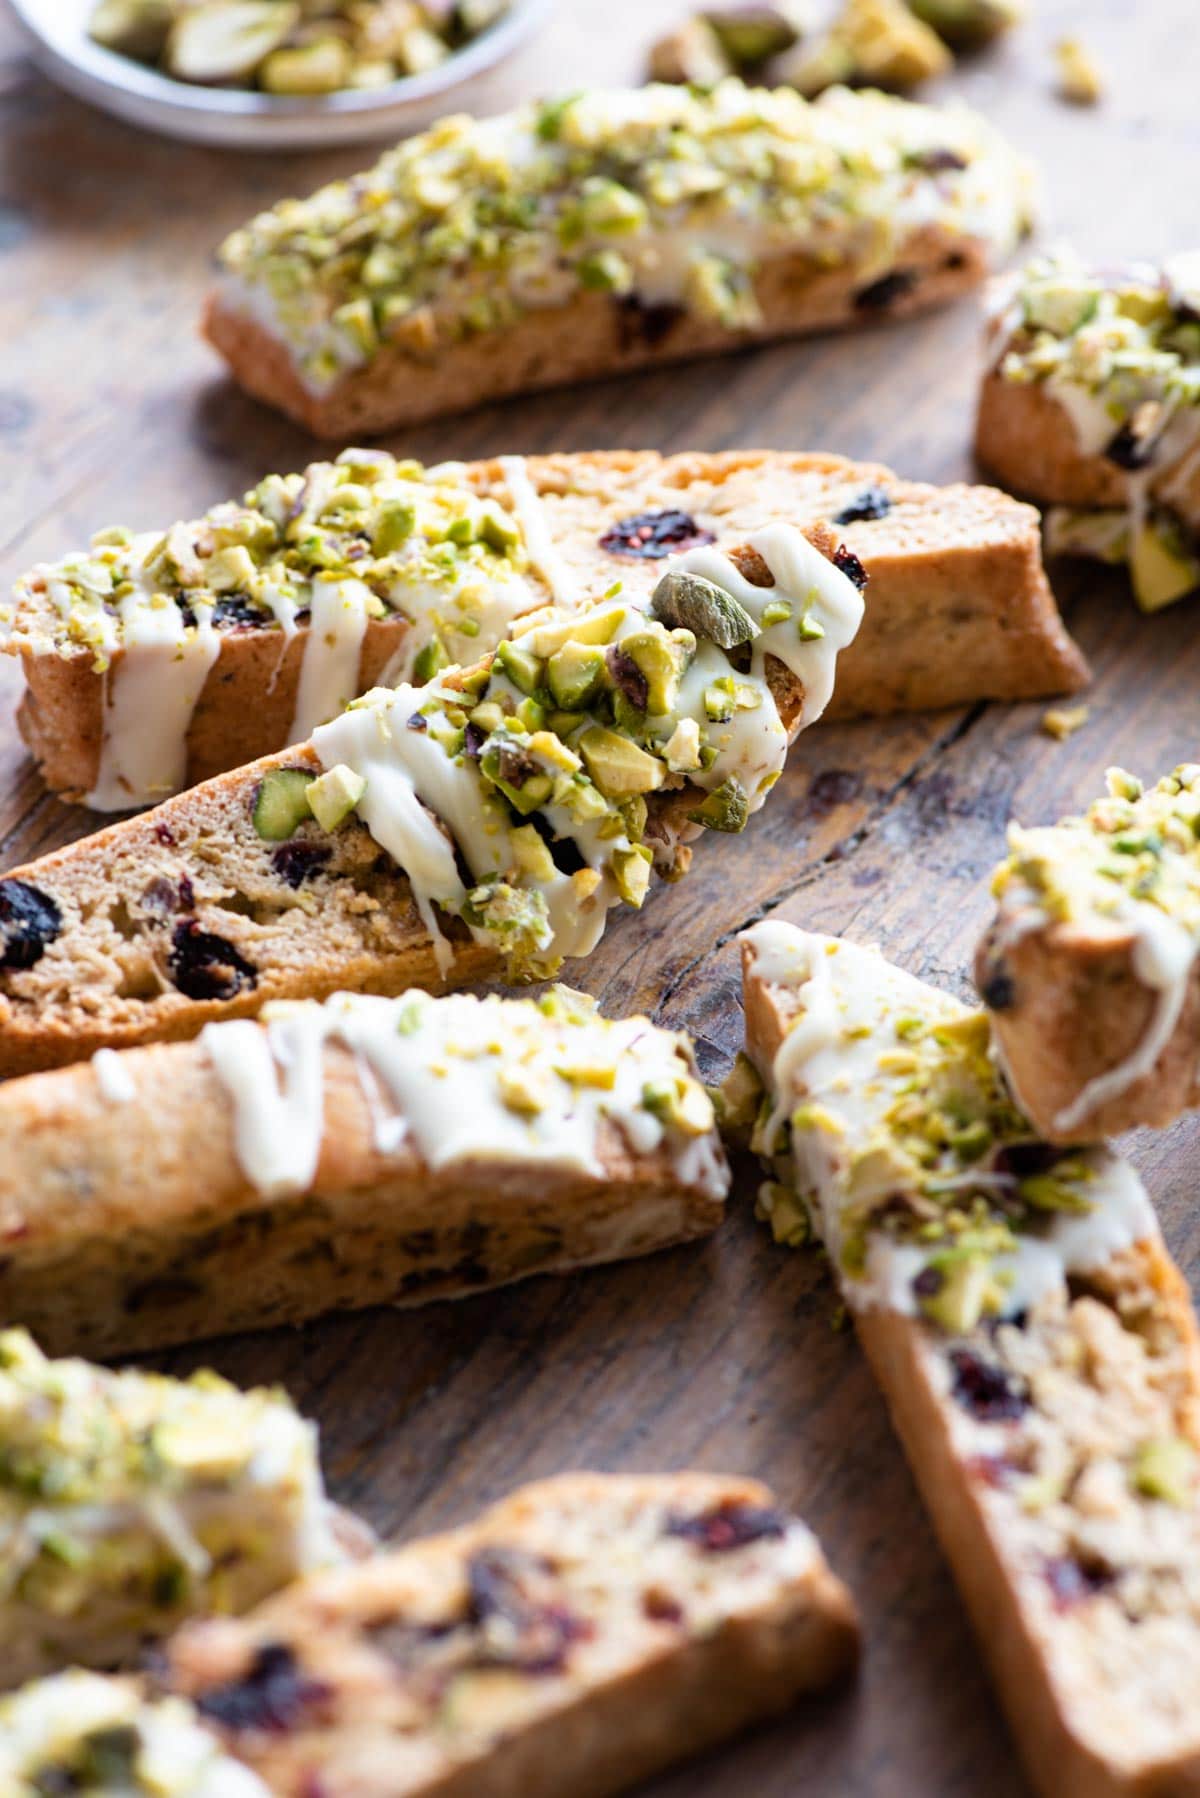 A close up of pistachio biscotti with cranberries and white chocolate on a wooden surface